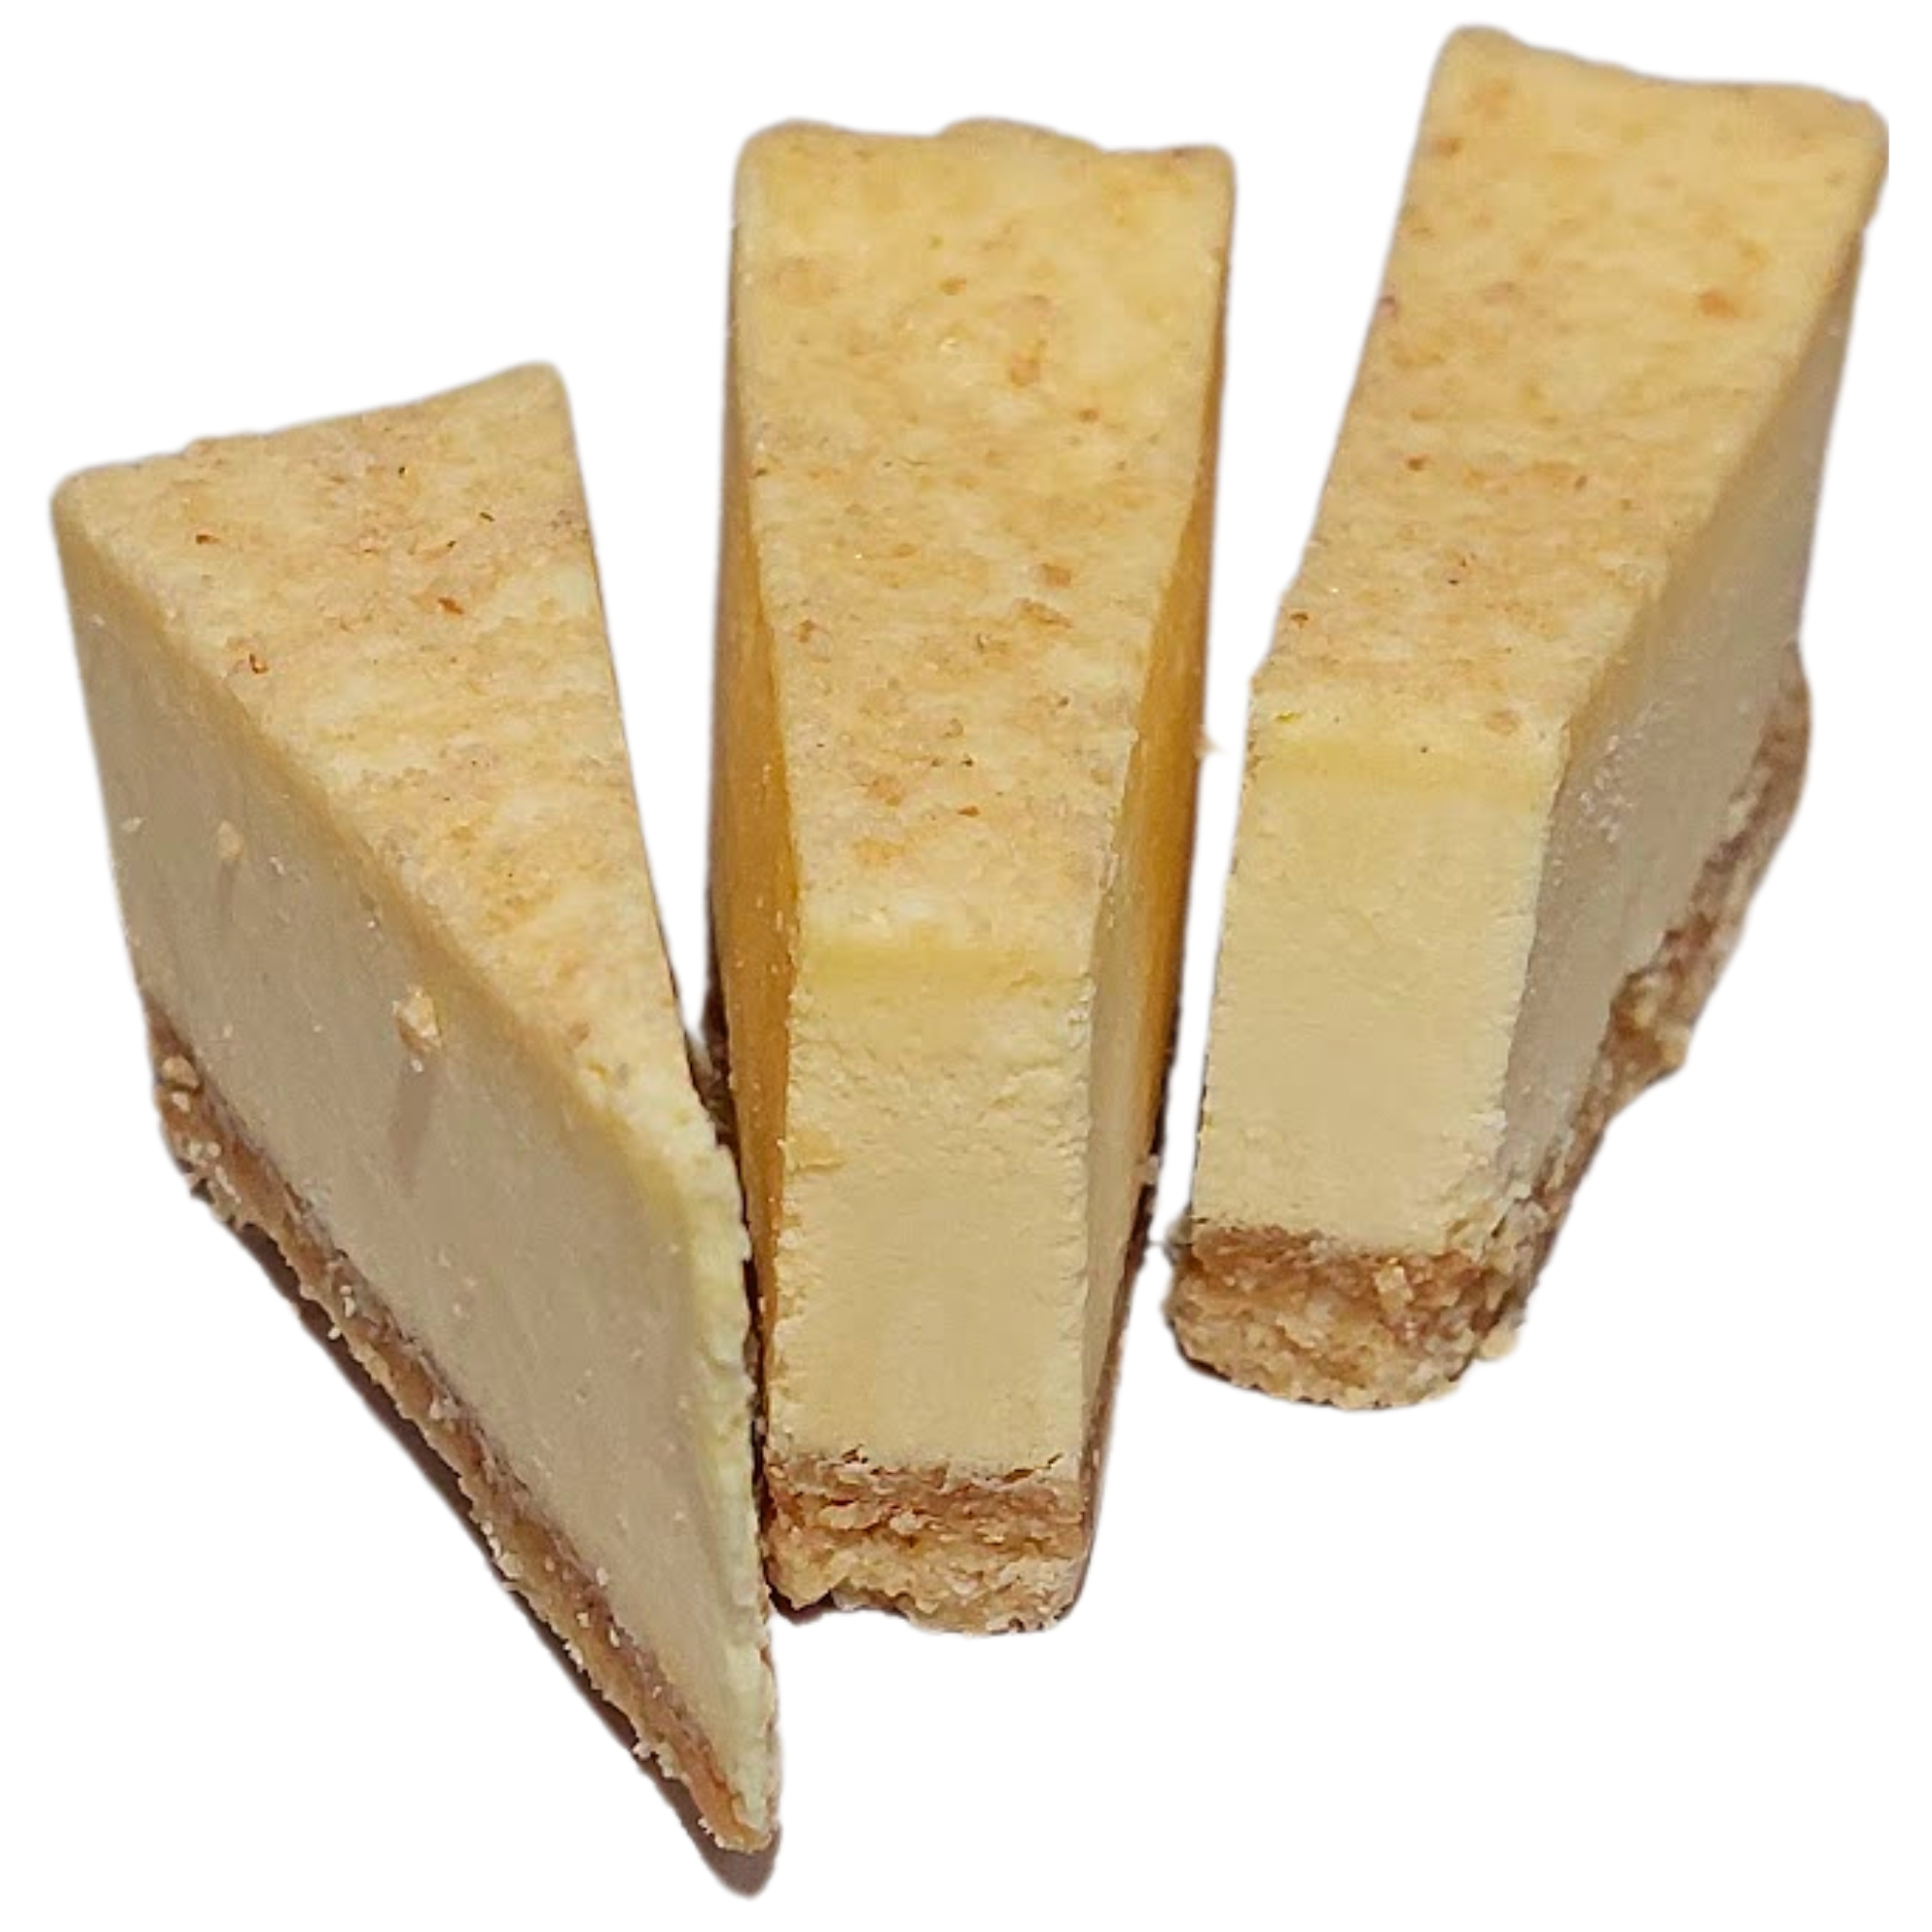 Freeze Dried Cheesecake New York Baked